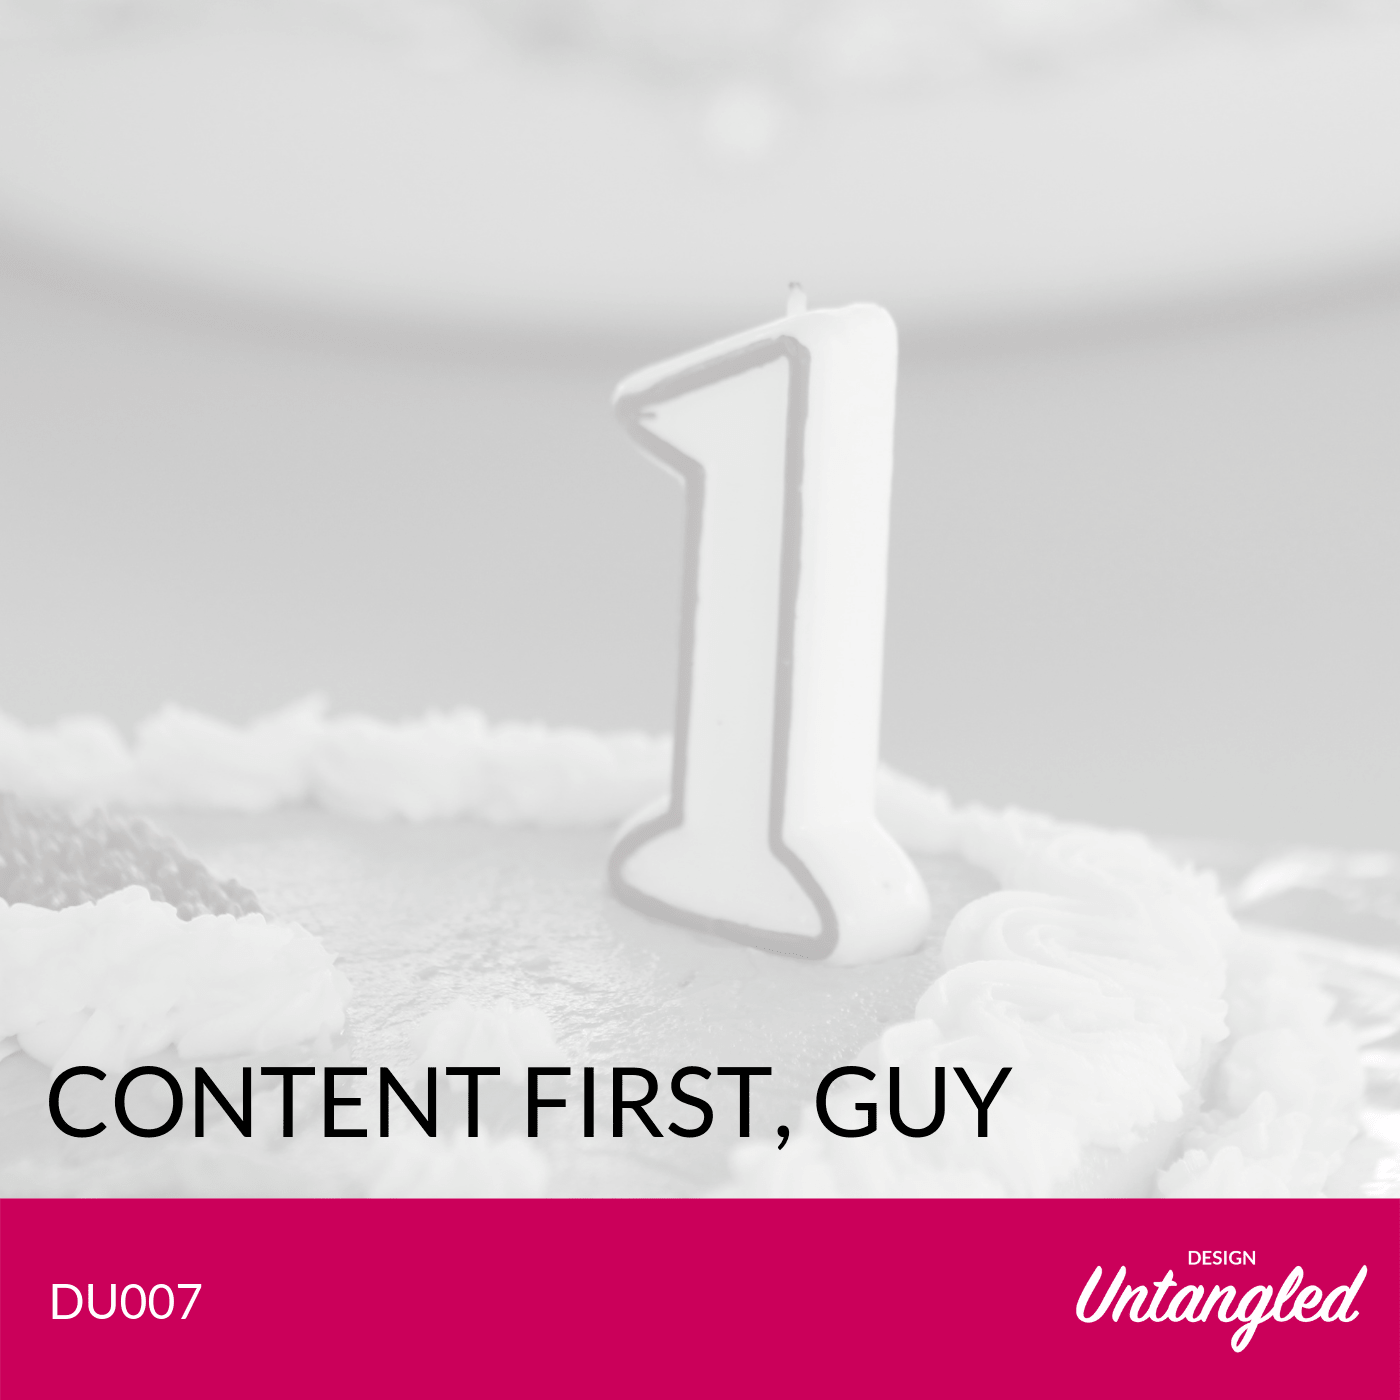 DU007 – Content first, guy